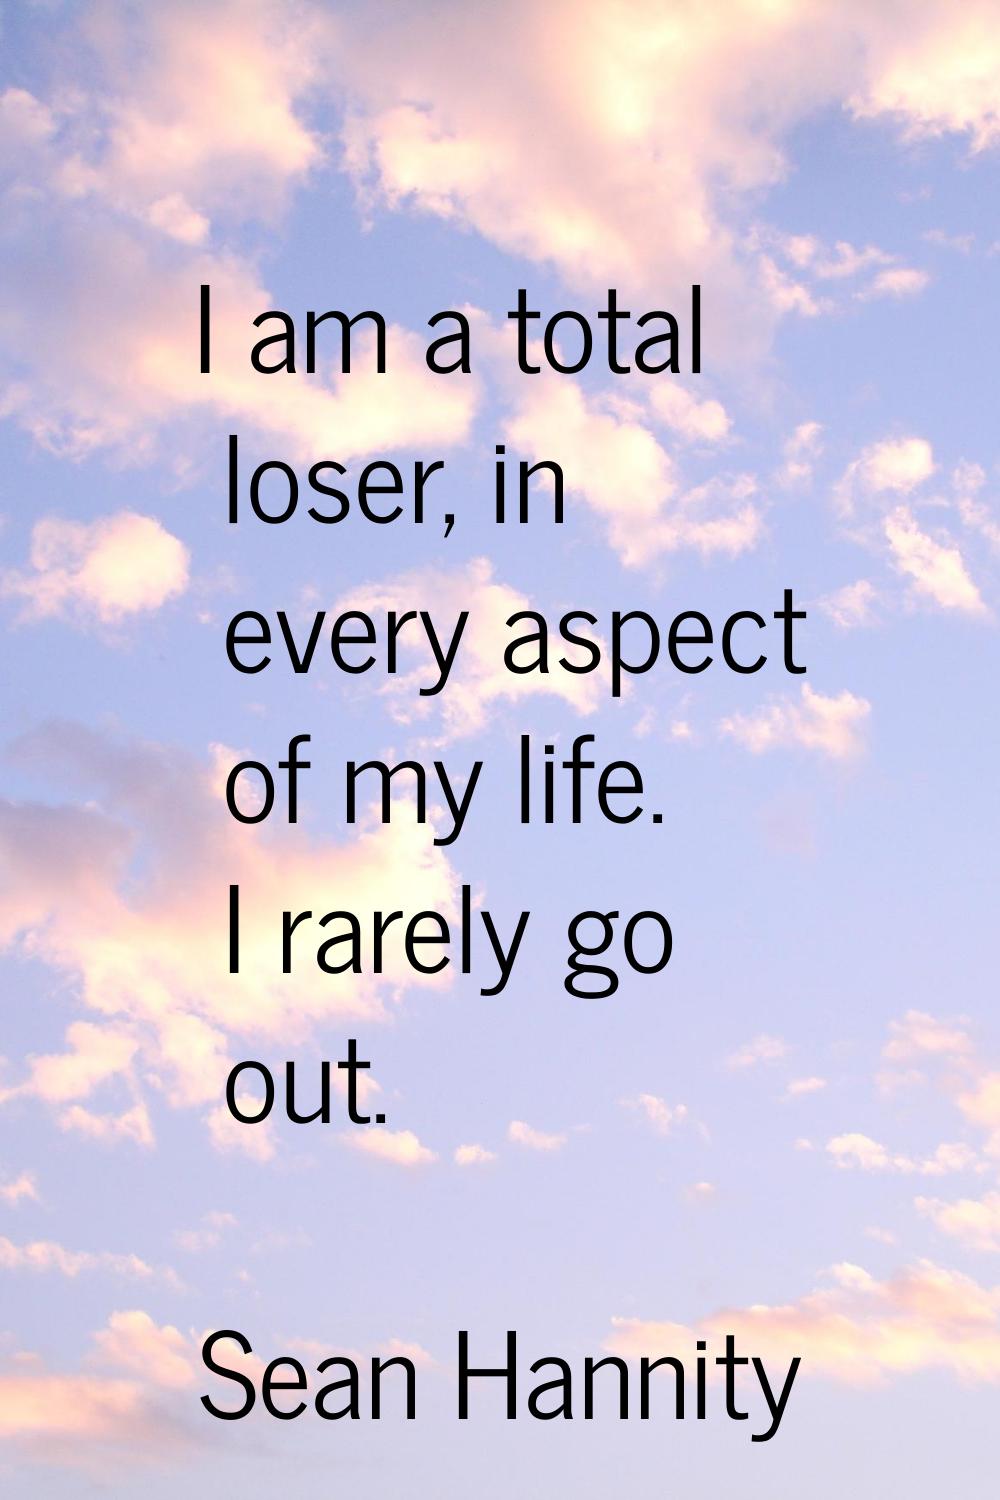 I am a total loser, in every aspect of my life. I rarely go out.